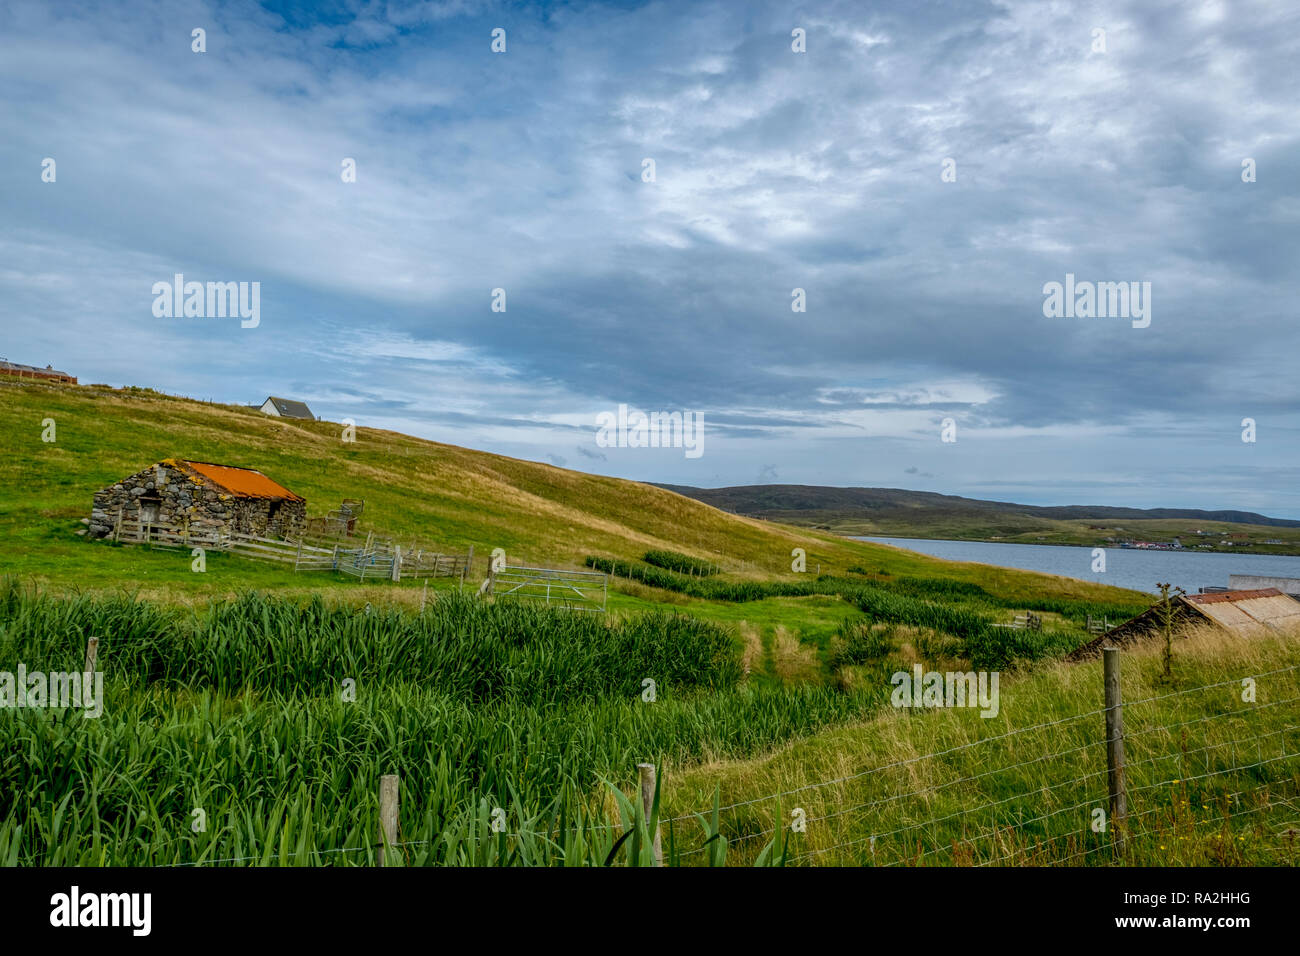 A croft house on a hillside overlooking the North Sea with propering crops in the foreground on the Mainland of the Shetland Islands of Scotland Stock Photo